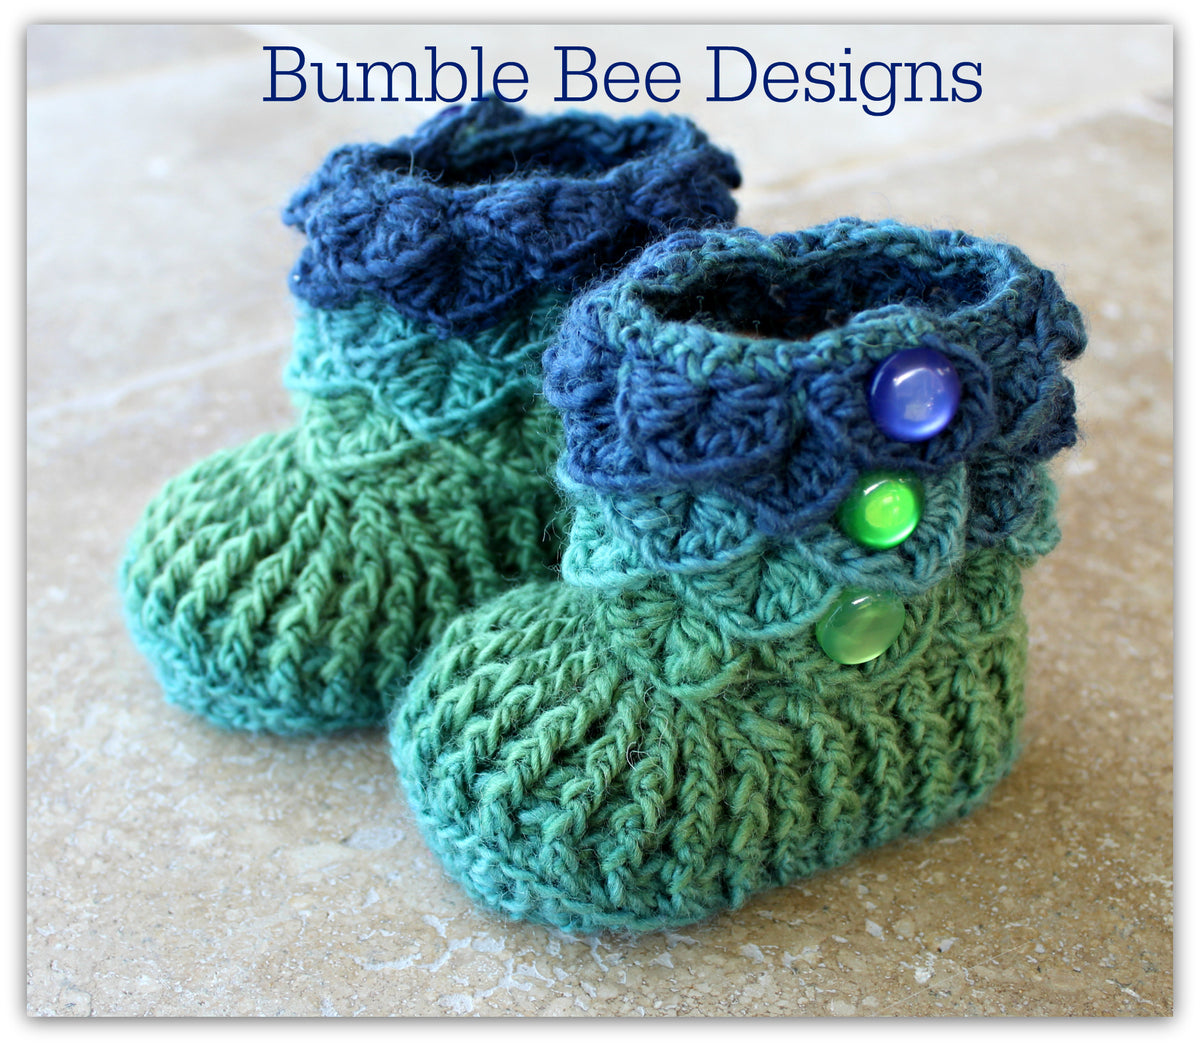 crocodile stitch baby booties that stay on - baby slippers - baby booties - new baby gift - rainbow - 6-12 months